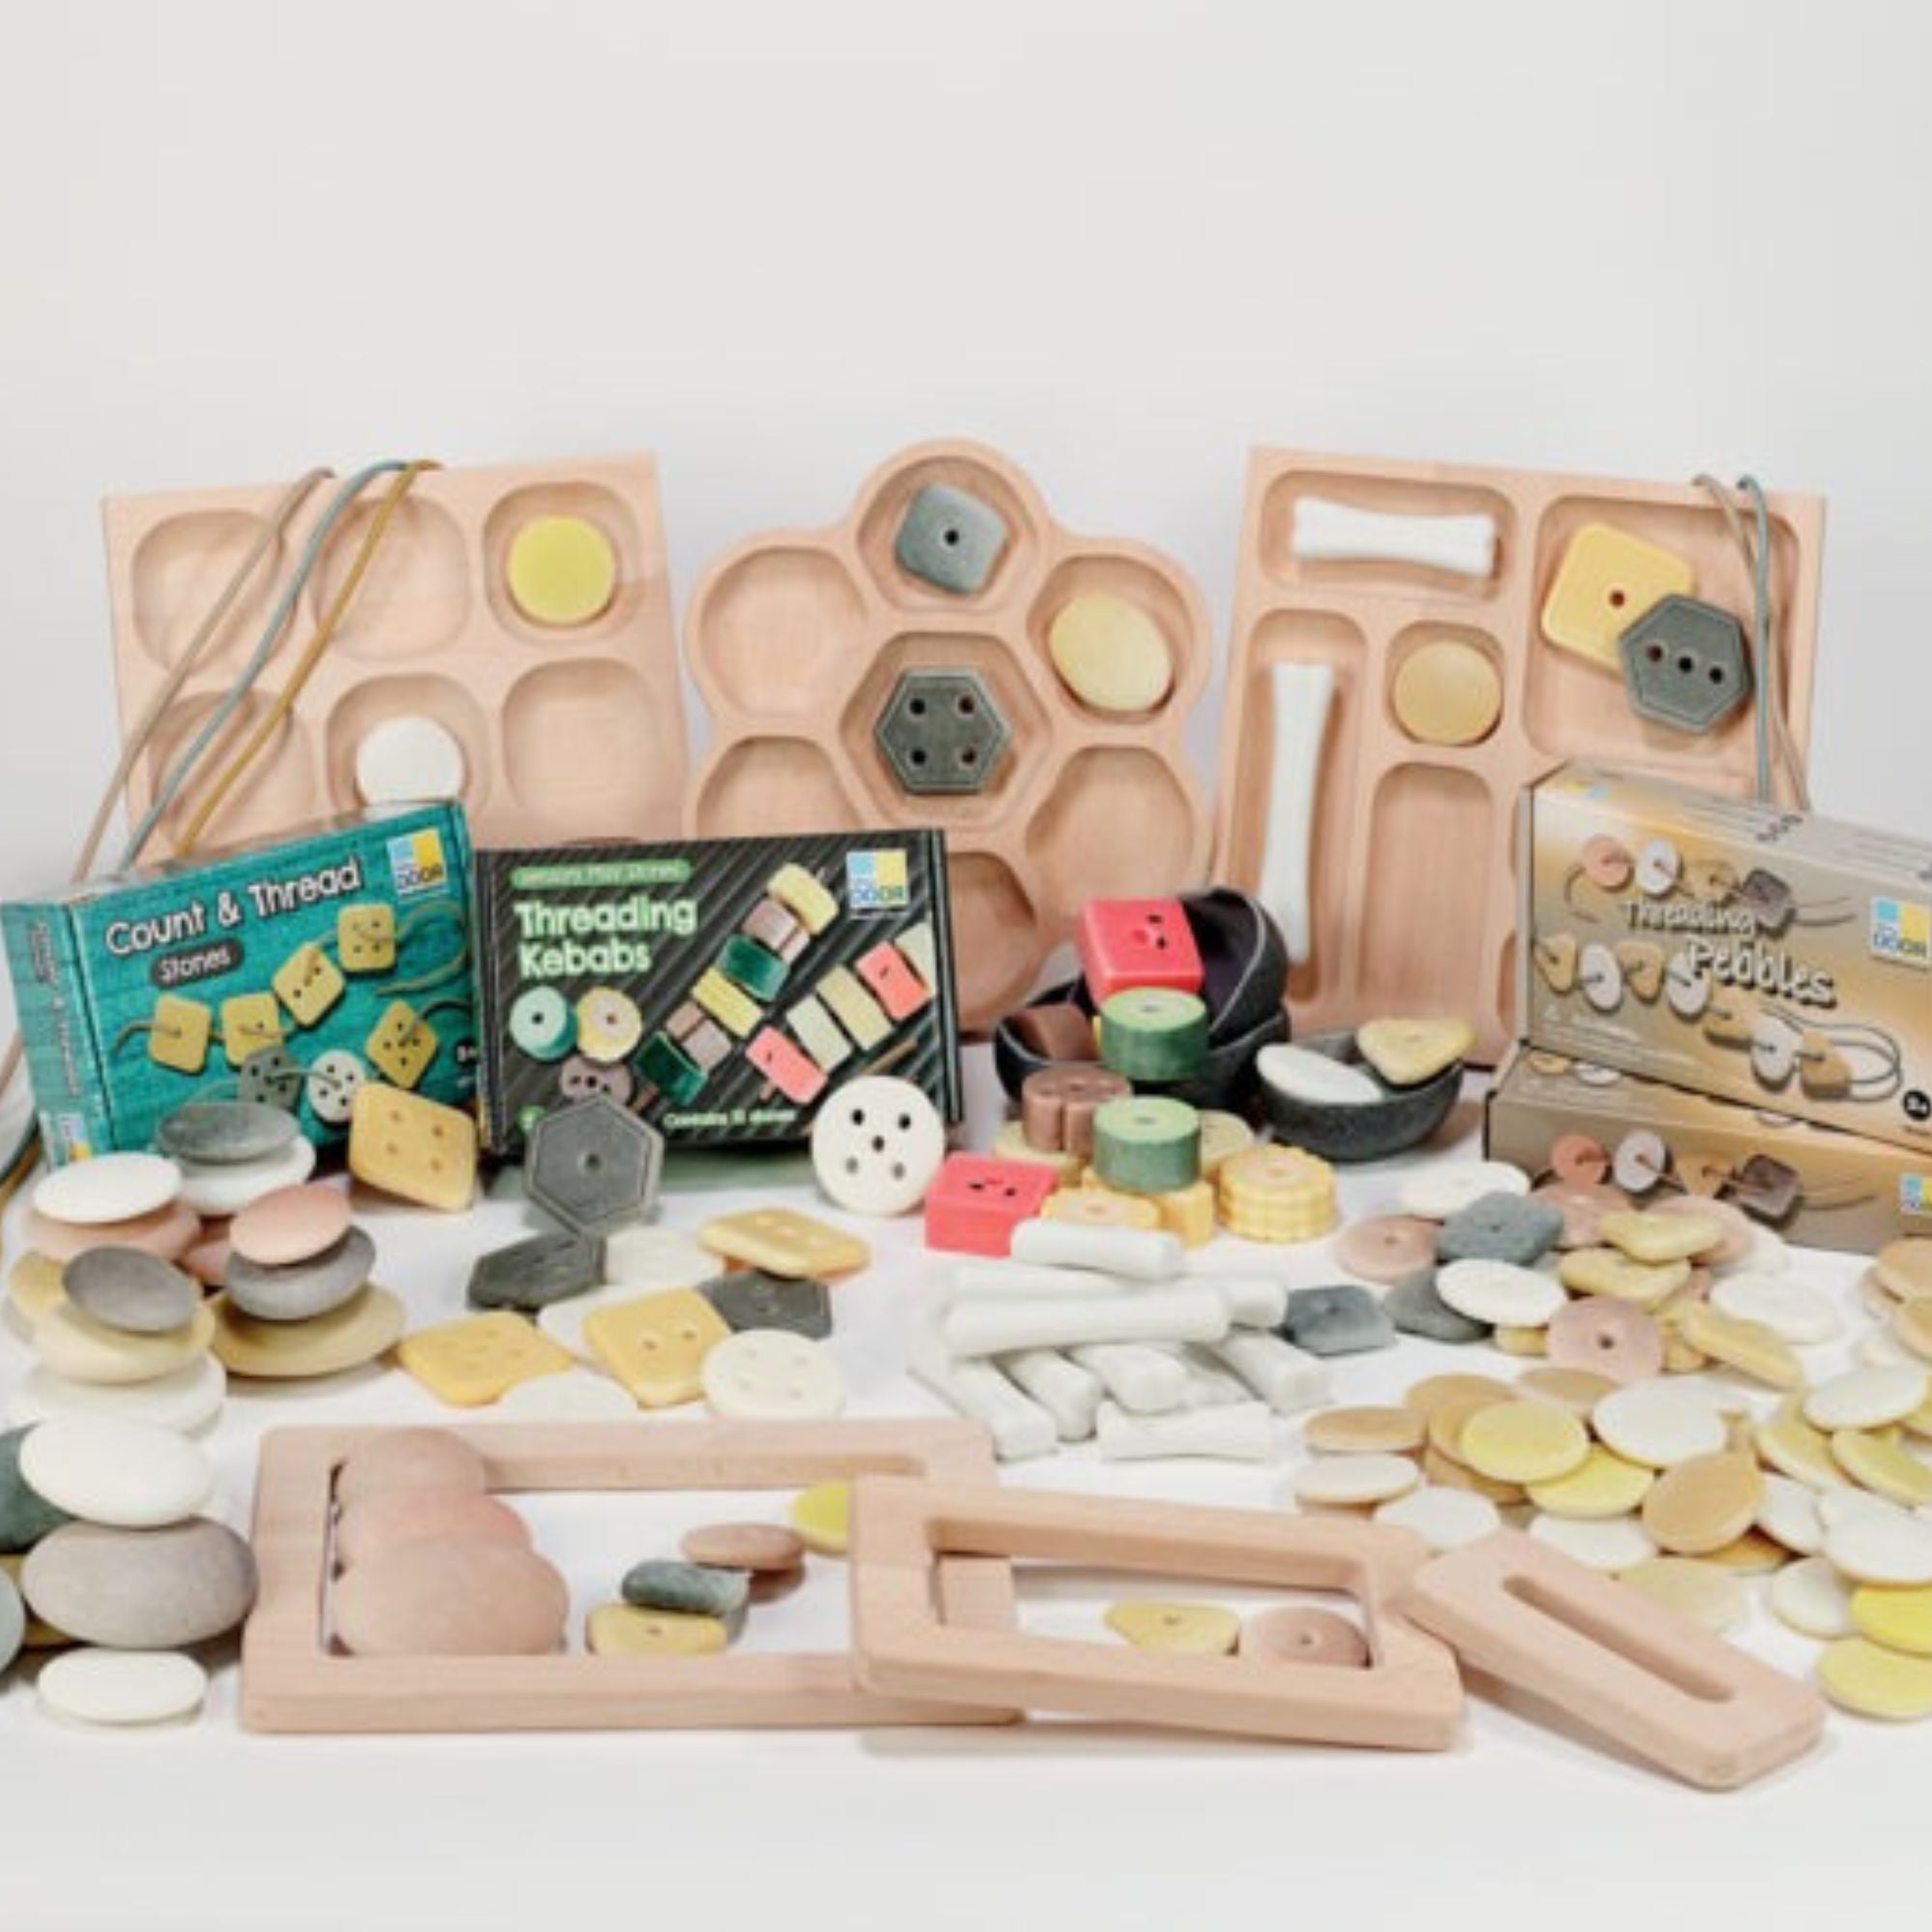 Loose Parts Collection, Children learn from hands-on experiences where they can immerse themselves in natural play. If they can freely choose how to group, sort, count, build and explore, this gives them ownership of their play and learning. This collection of intriguing loose parts, tinker trays, bowls and frames will provide open-ended opportunities for children to be curious. The tactile, inviting nature of these resources makes them perfect for loose parts play and sensory investigations. Add them to tr